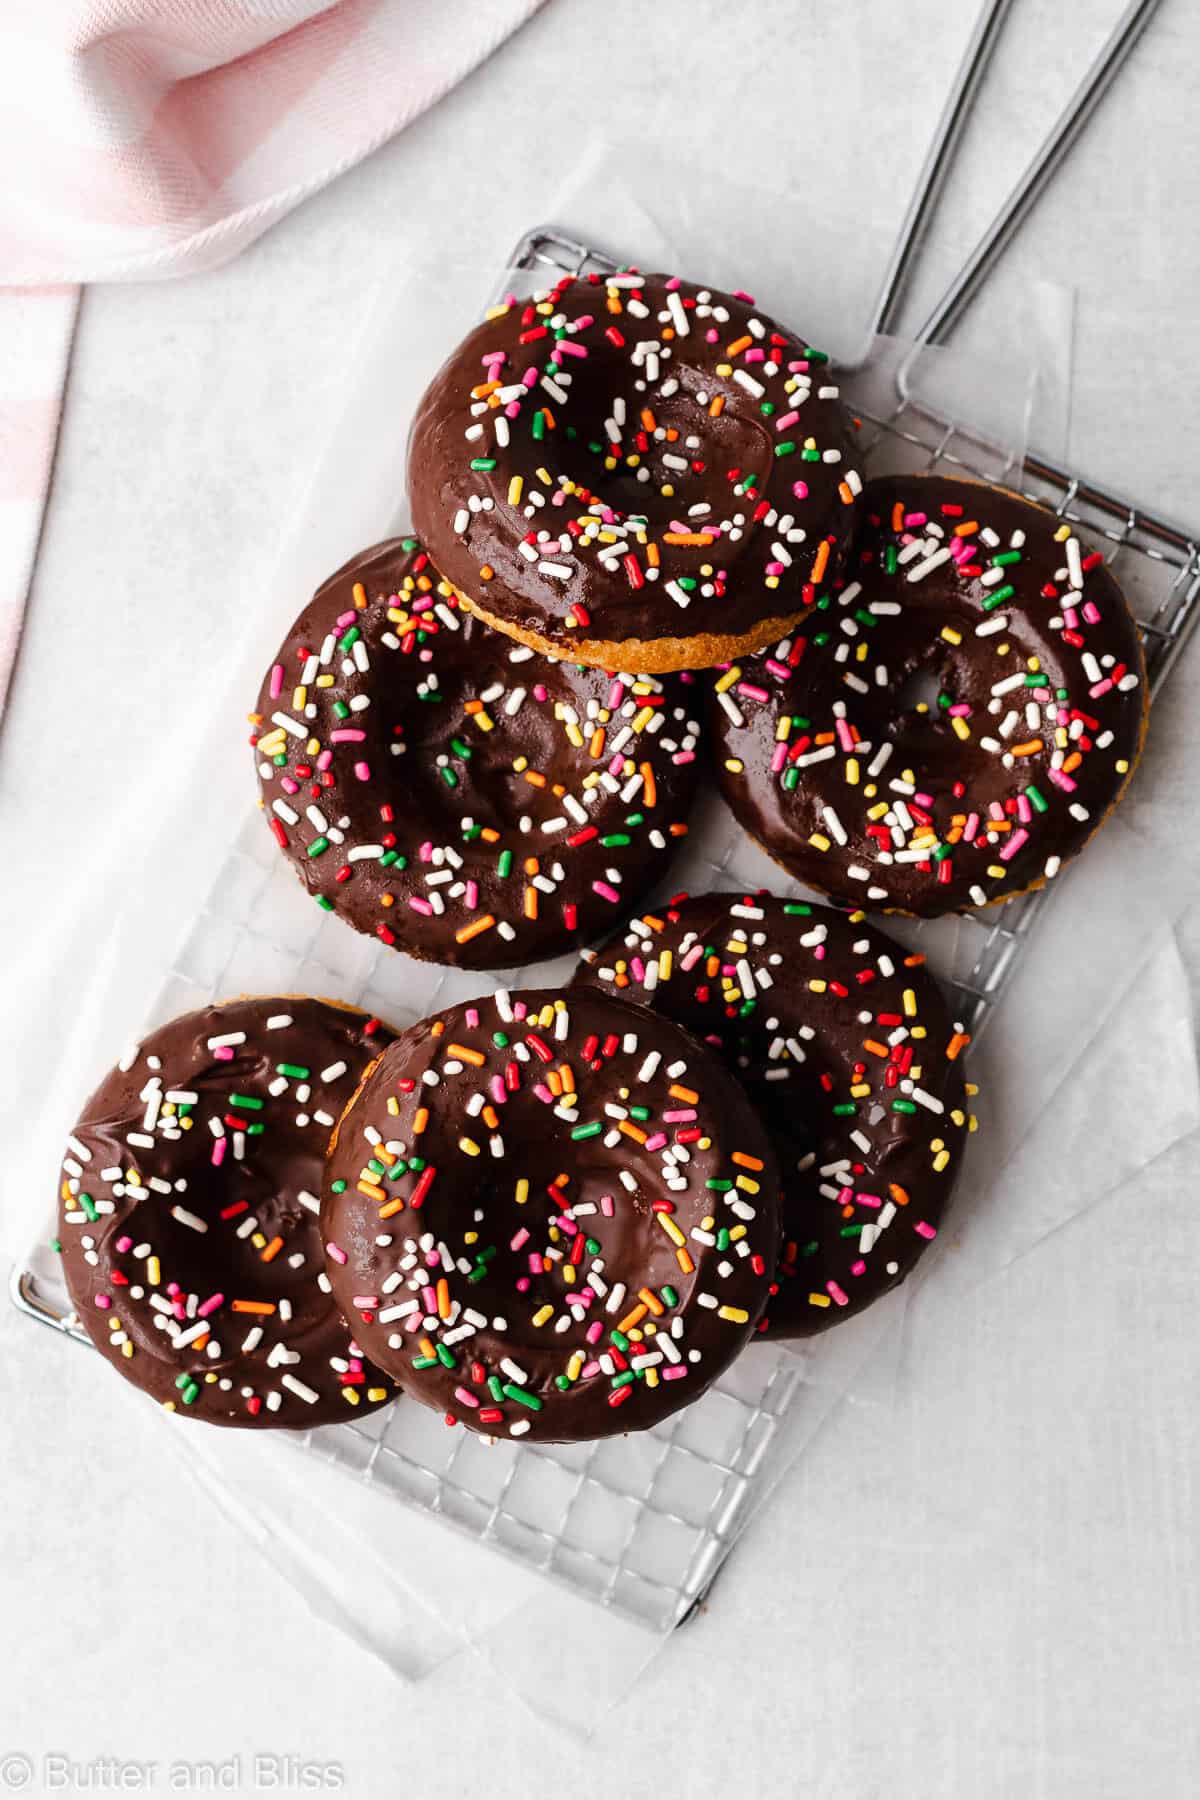 Chocolate glazed donuts with sprinkles in a pile on a wire cooling rack